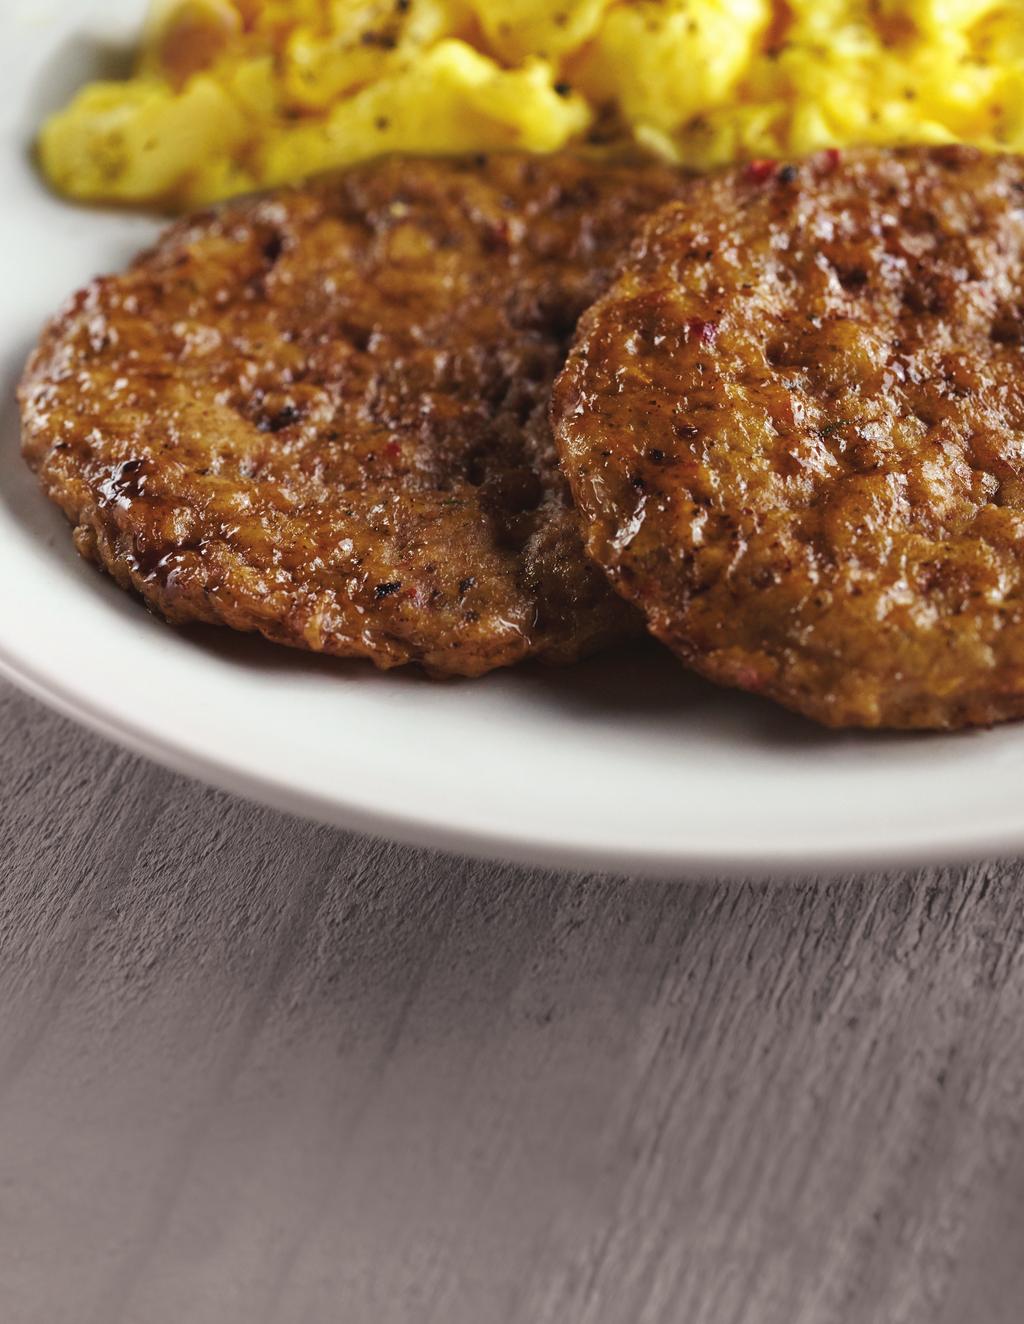 3 Fully Cooked Pork Formed Patties Serve the best with Jimmy Dean Breakfast Sausage.